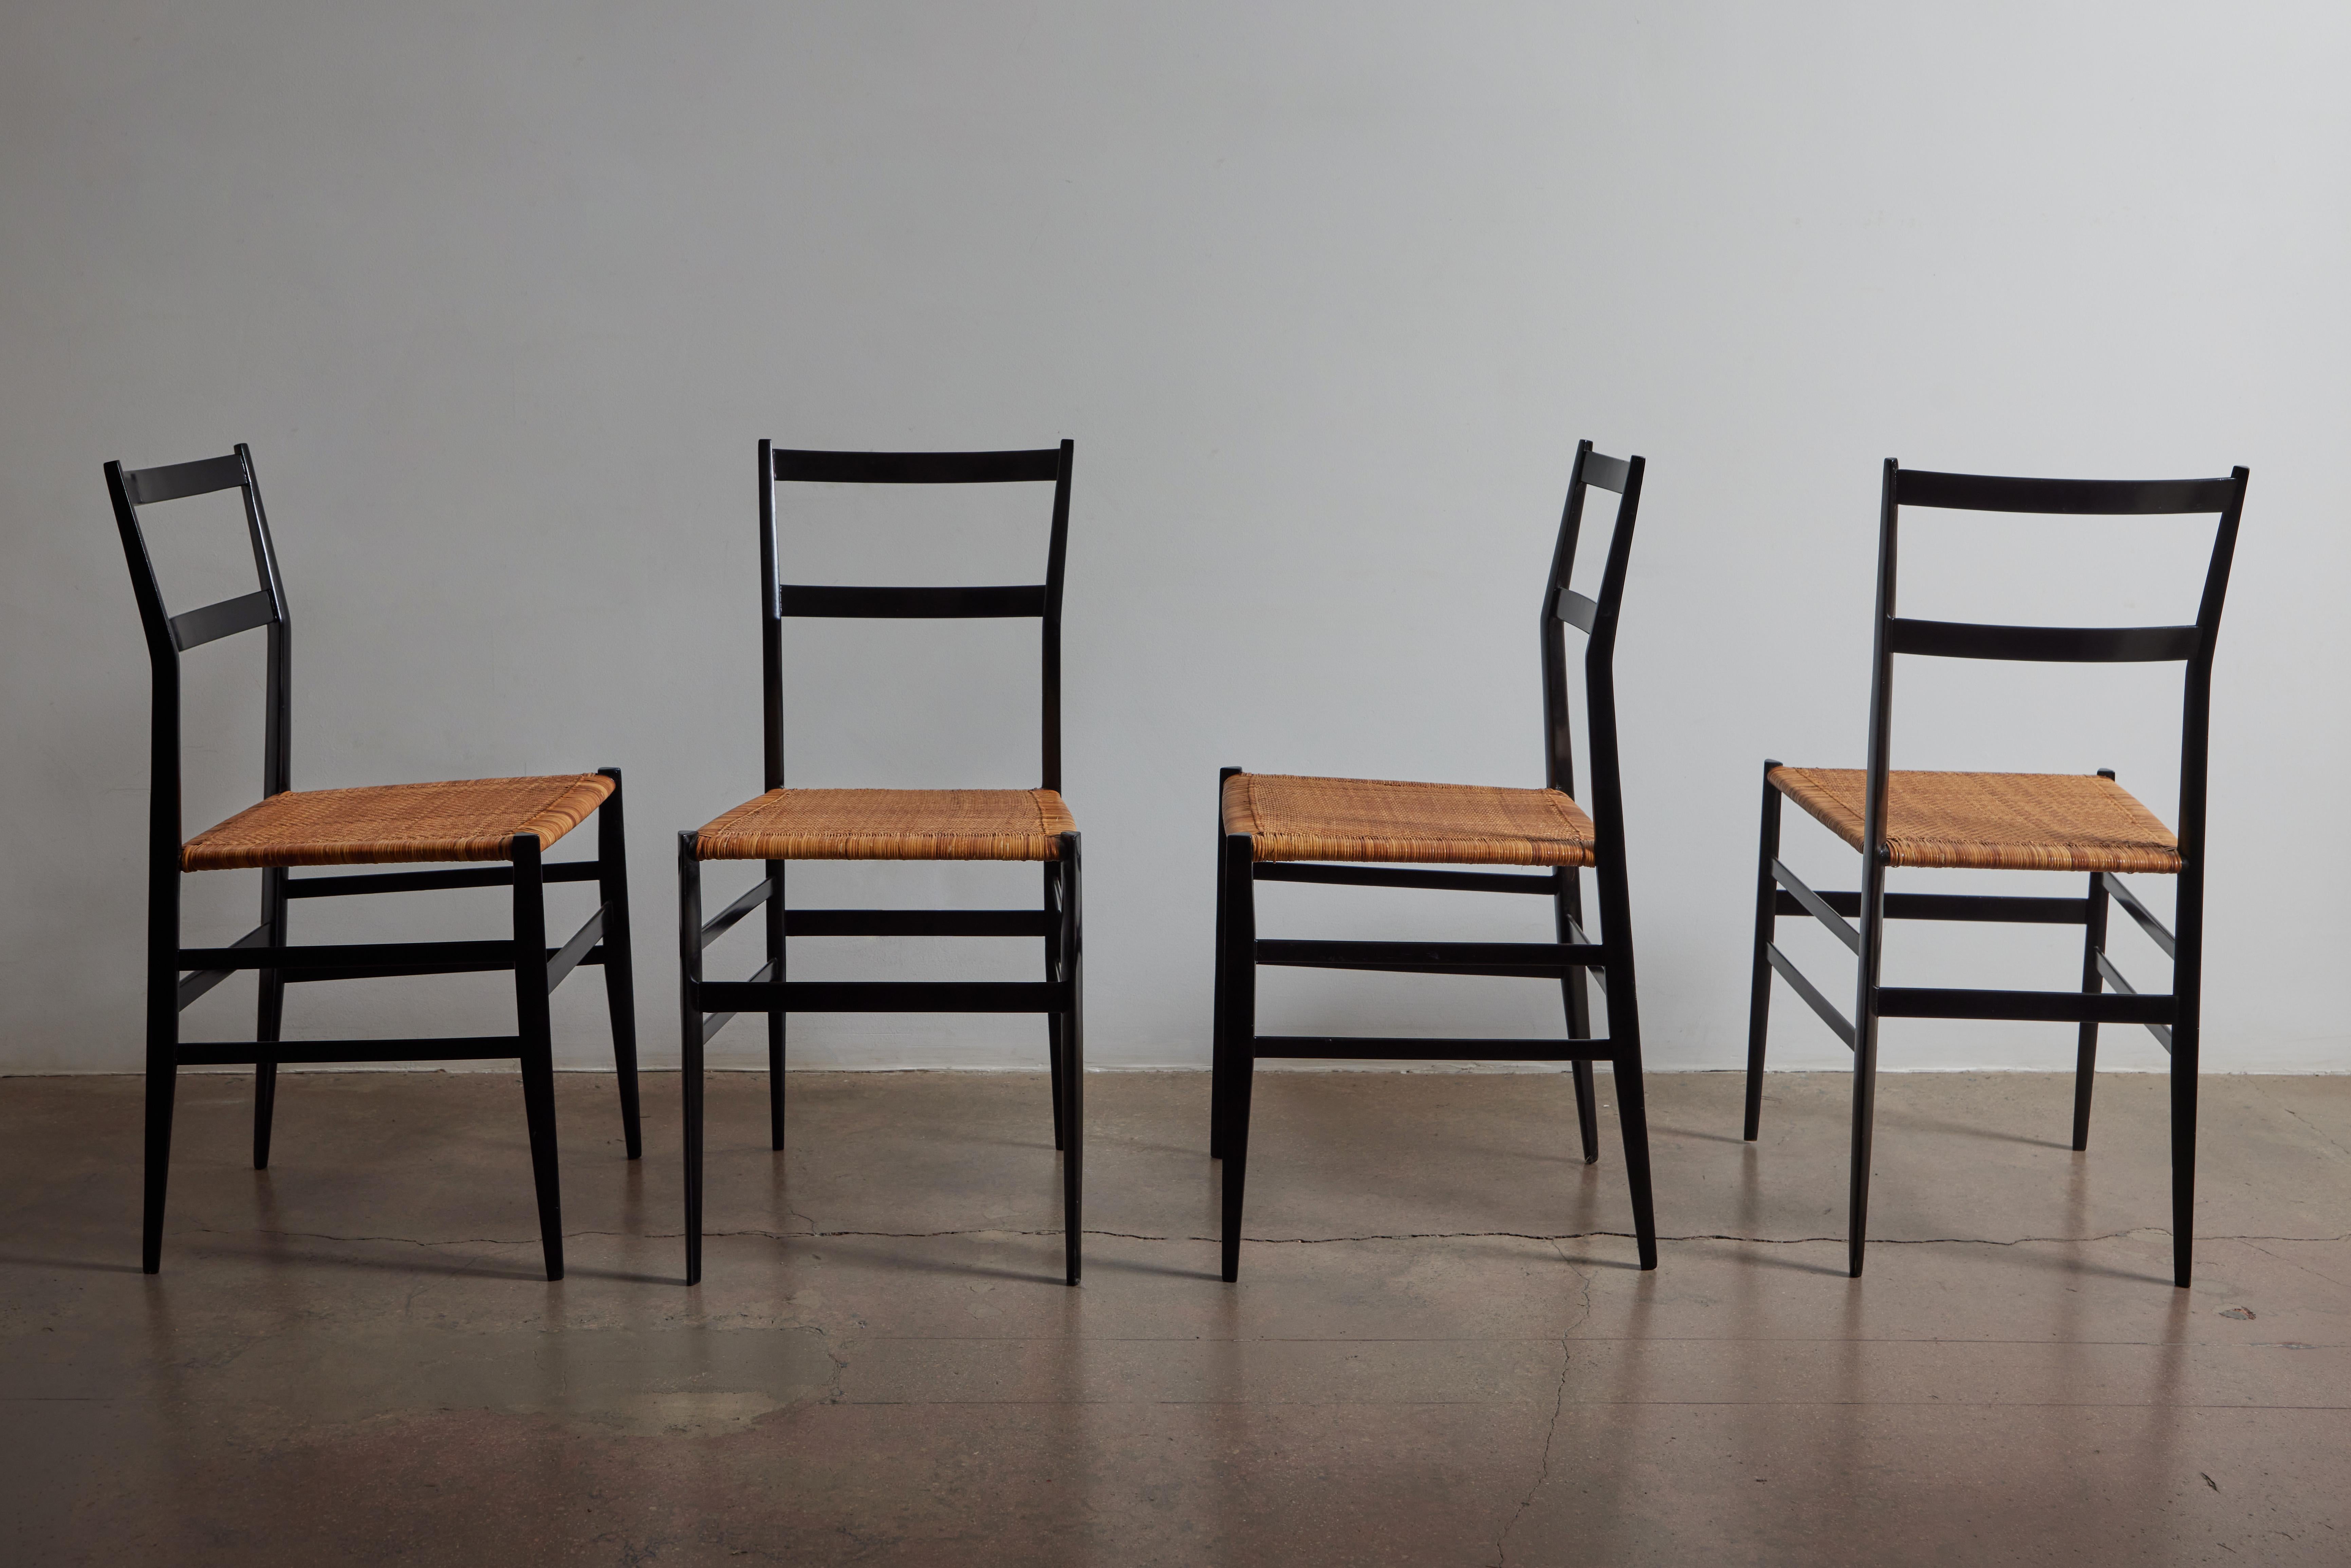 Historical set of four Superleggera chairs by Gio Ponti with original caning and black lacquered wood frame. Made in Italy circa 1957.
